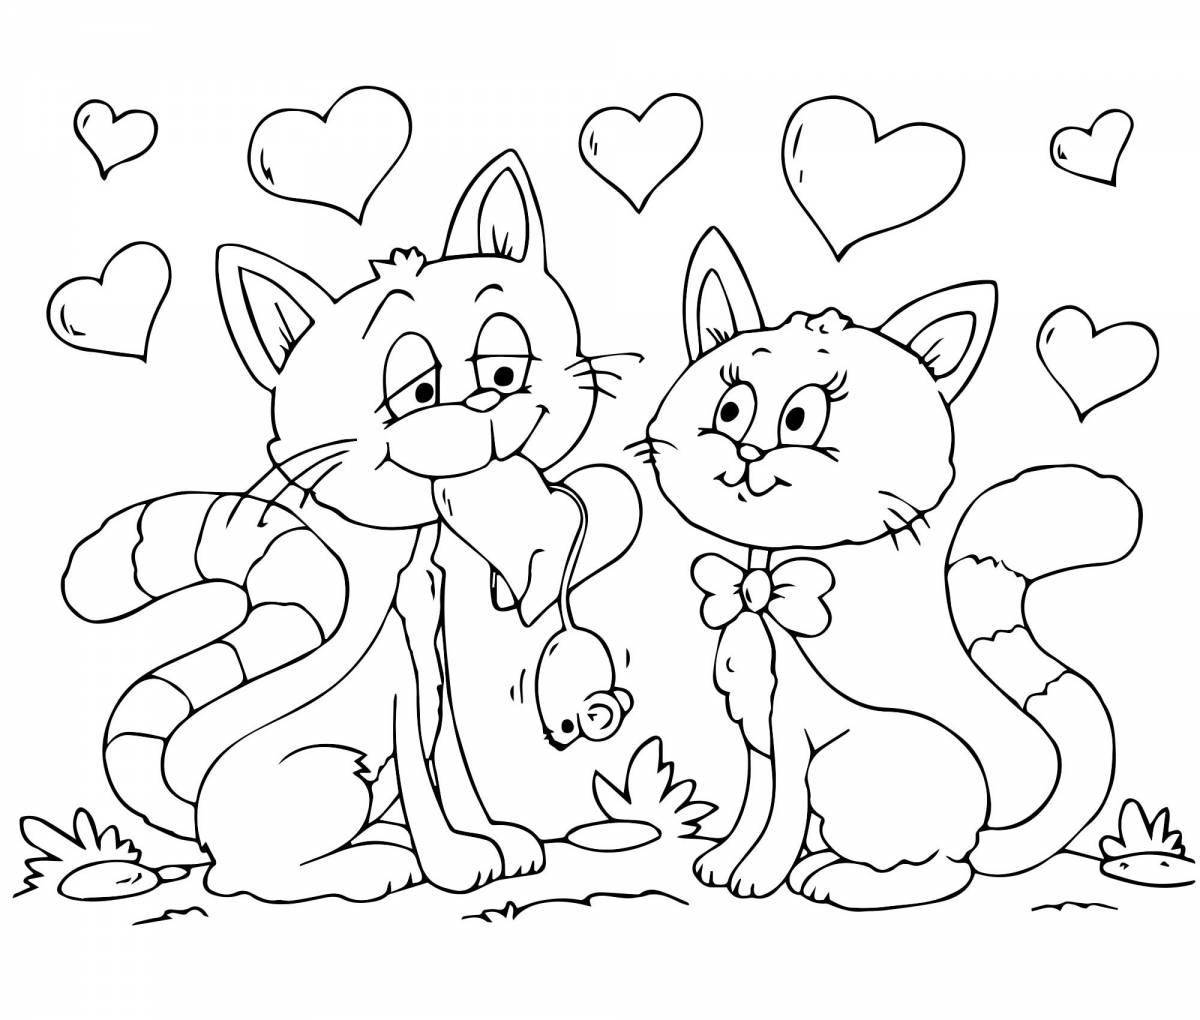 Playful valentines day coloring page